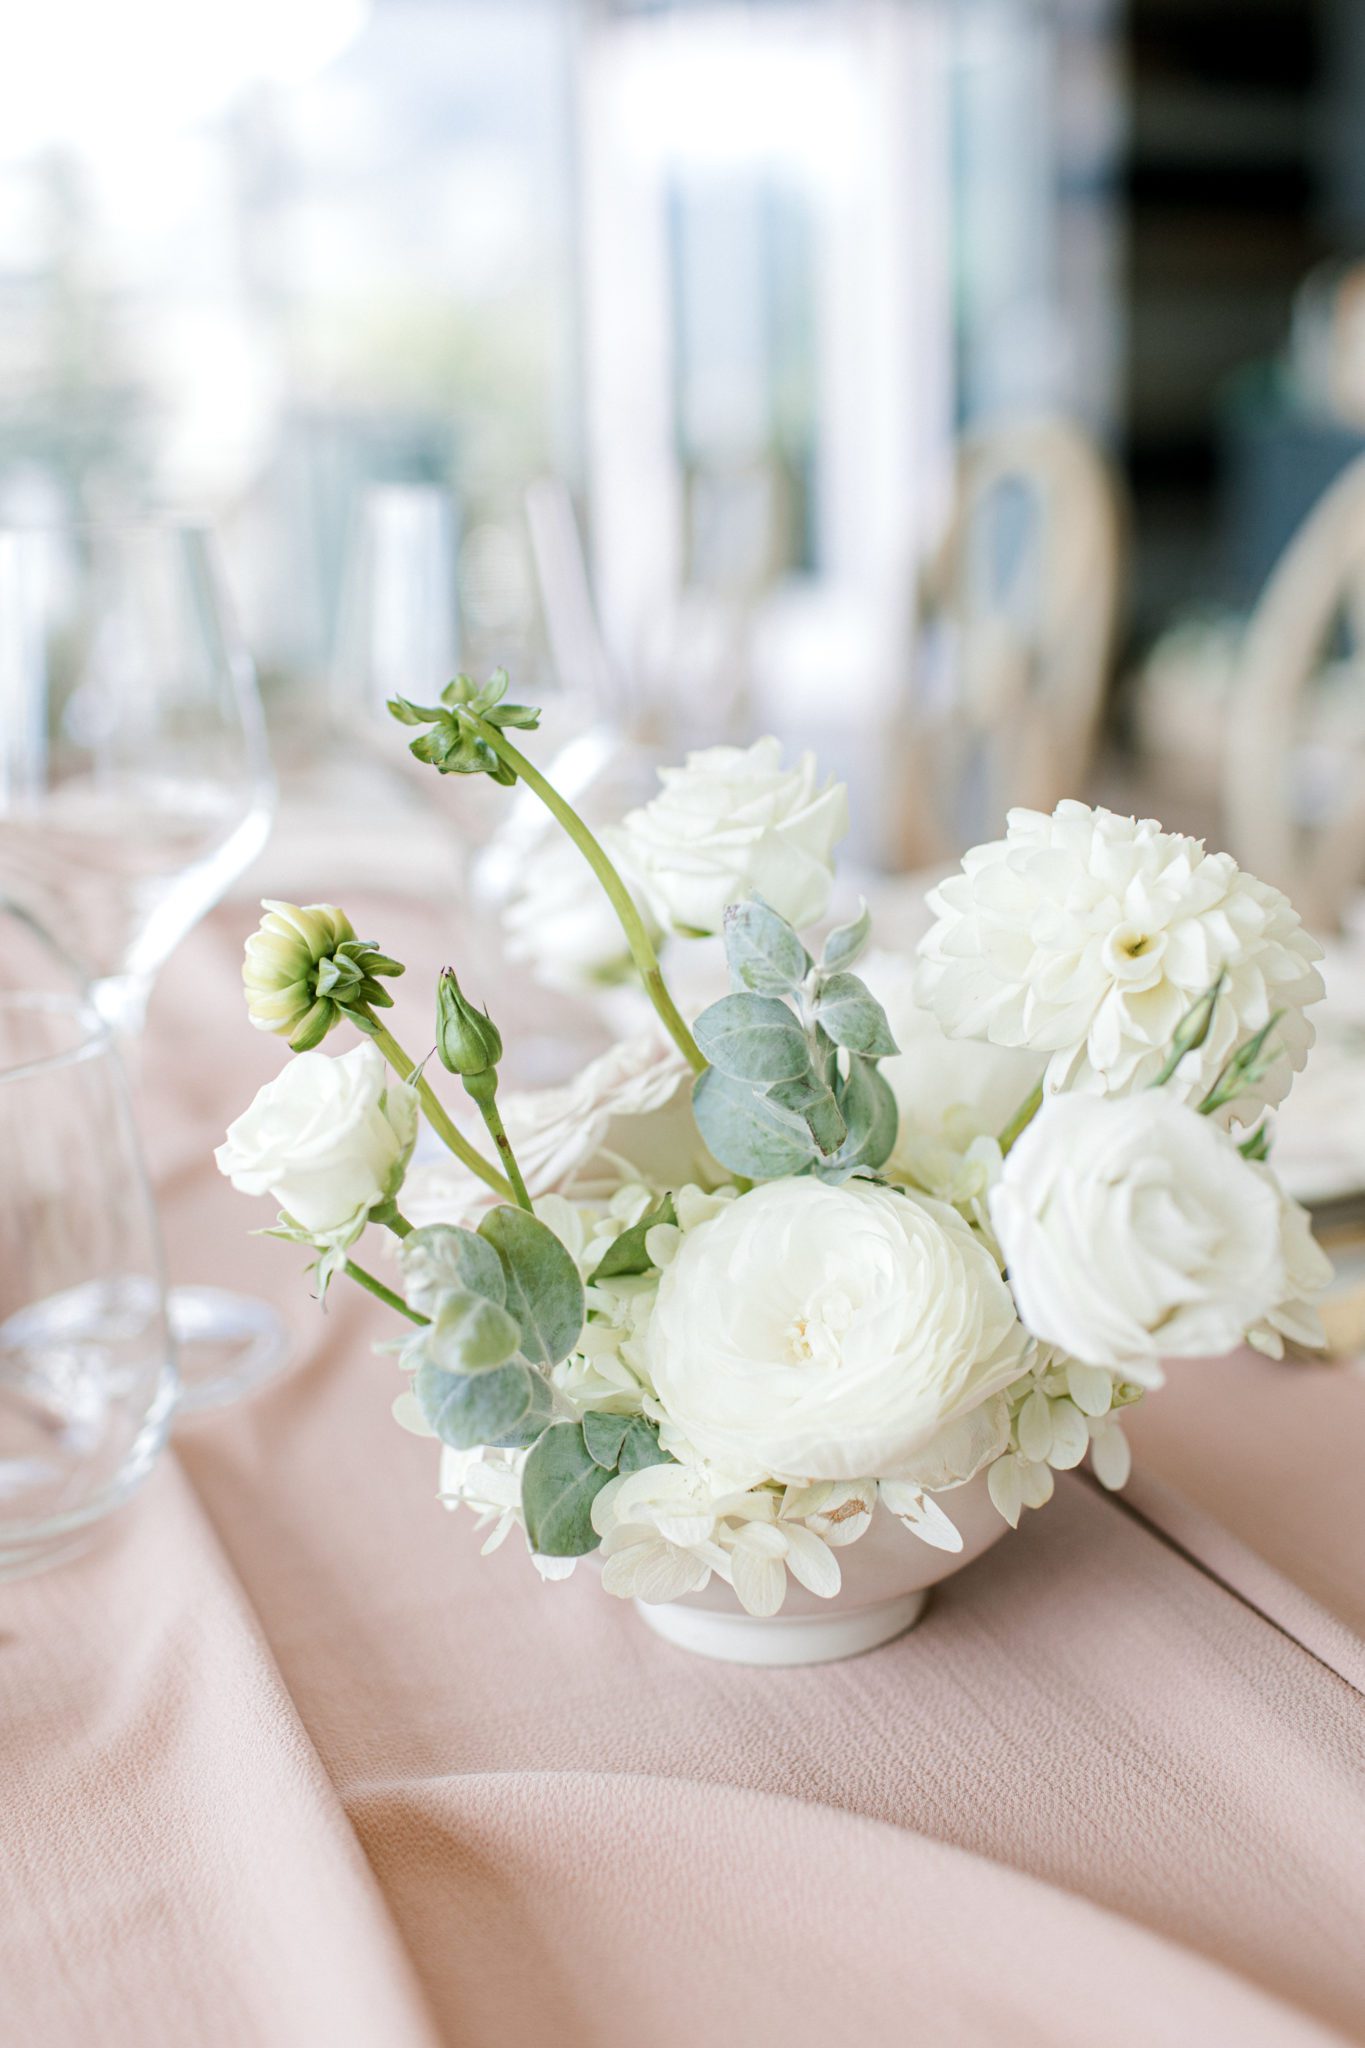 Ivory florals with greenery in this wedding centerpiece with a blush table runner